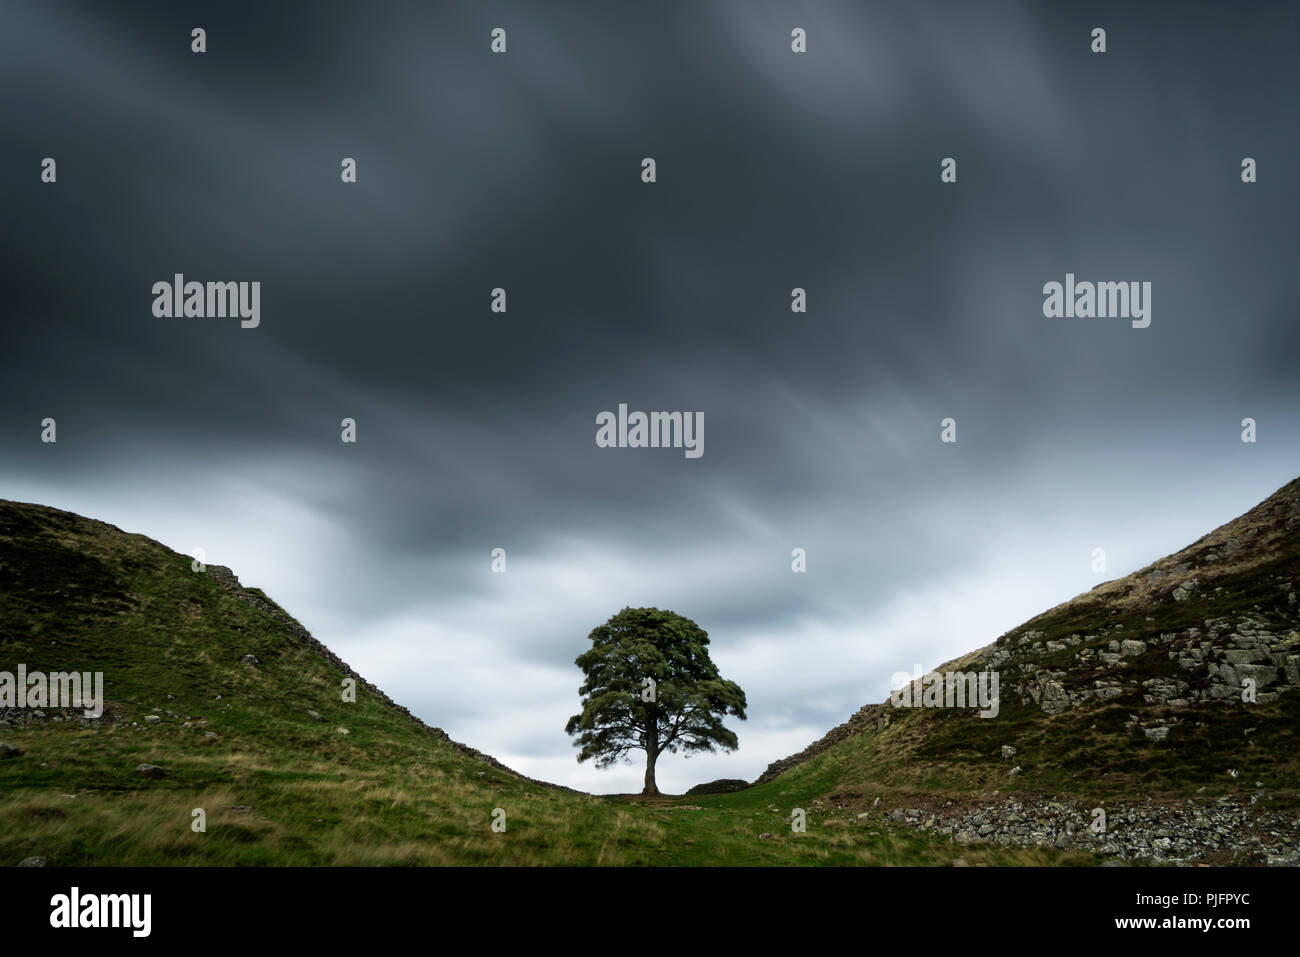 Long exposure shots of Sycamore Gap in Hadrian's Wall Country, Northumberland, England Stock Photo